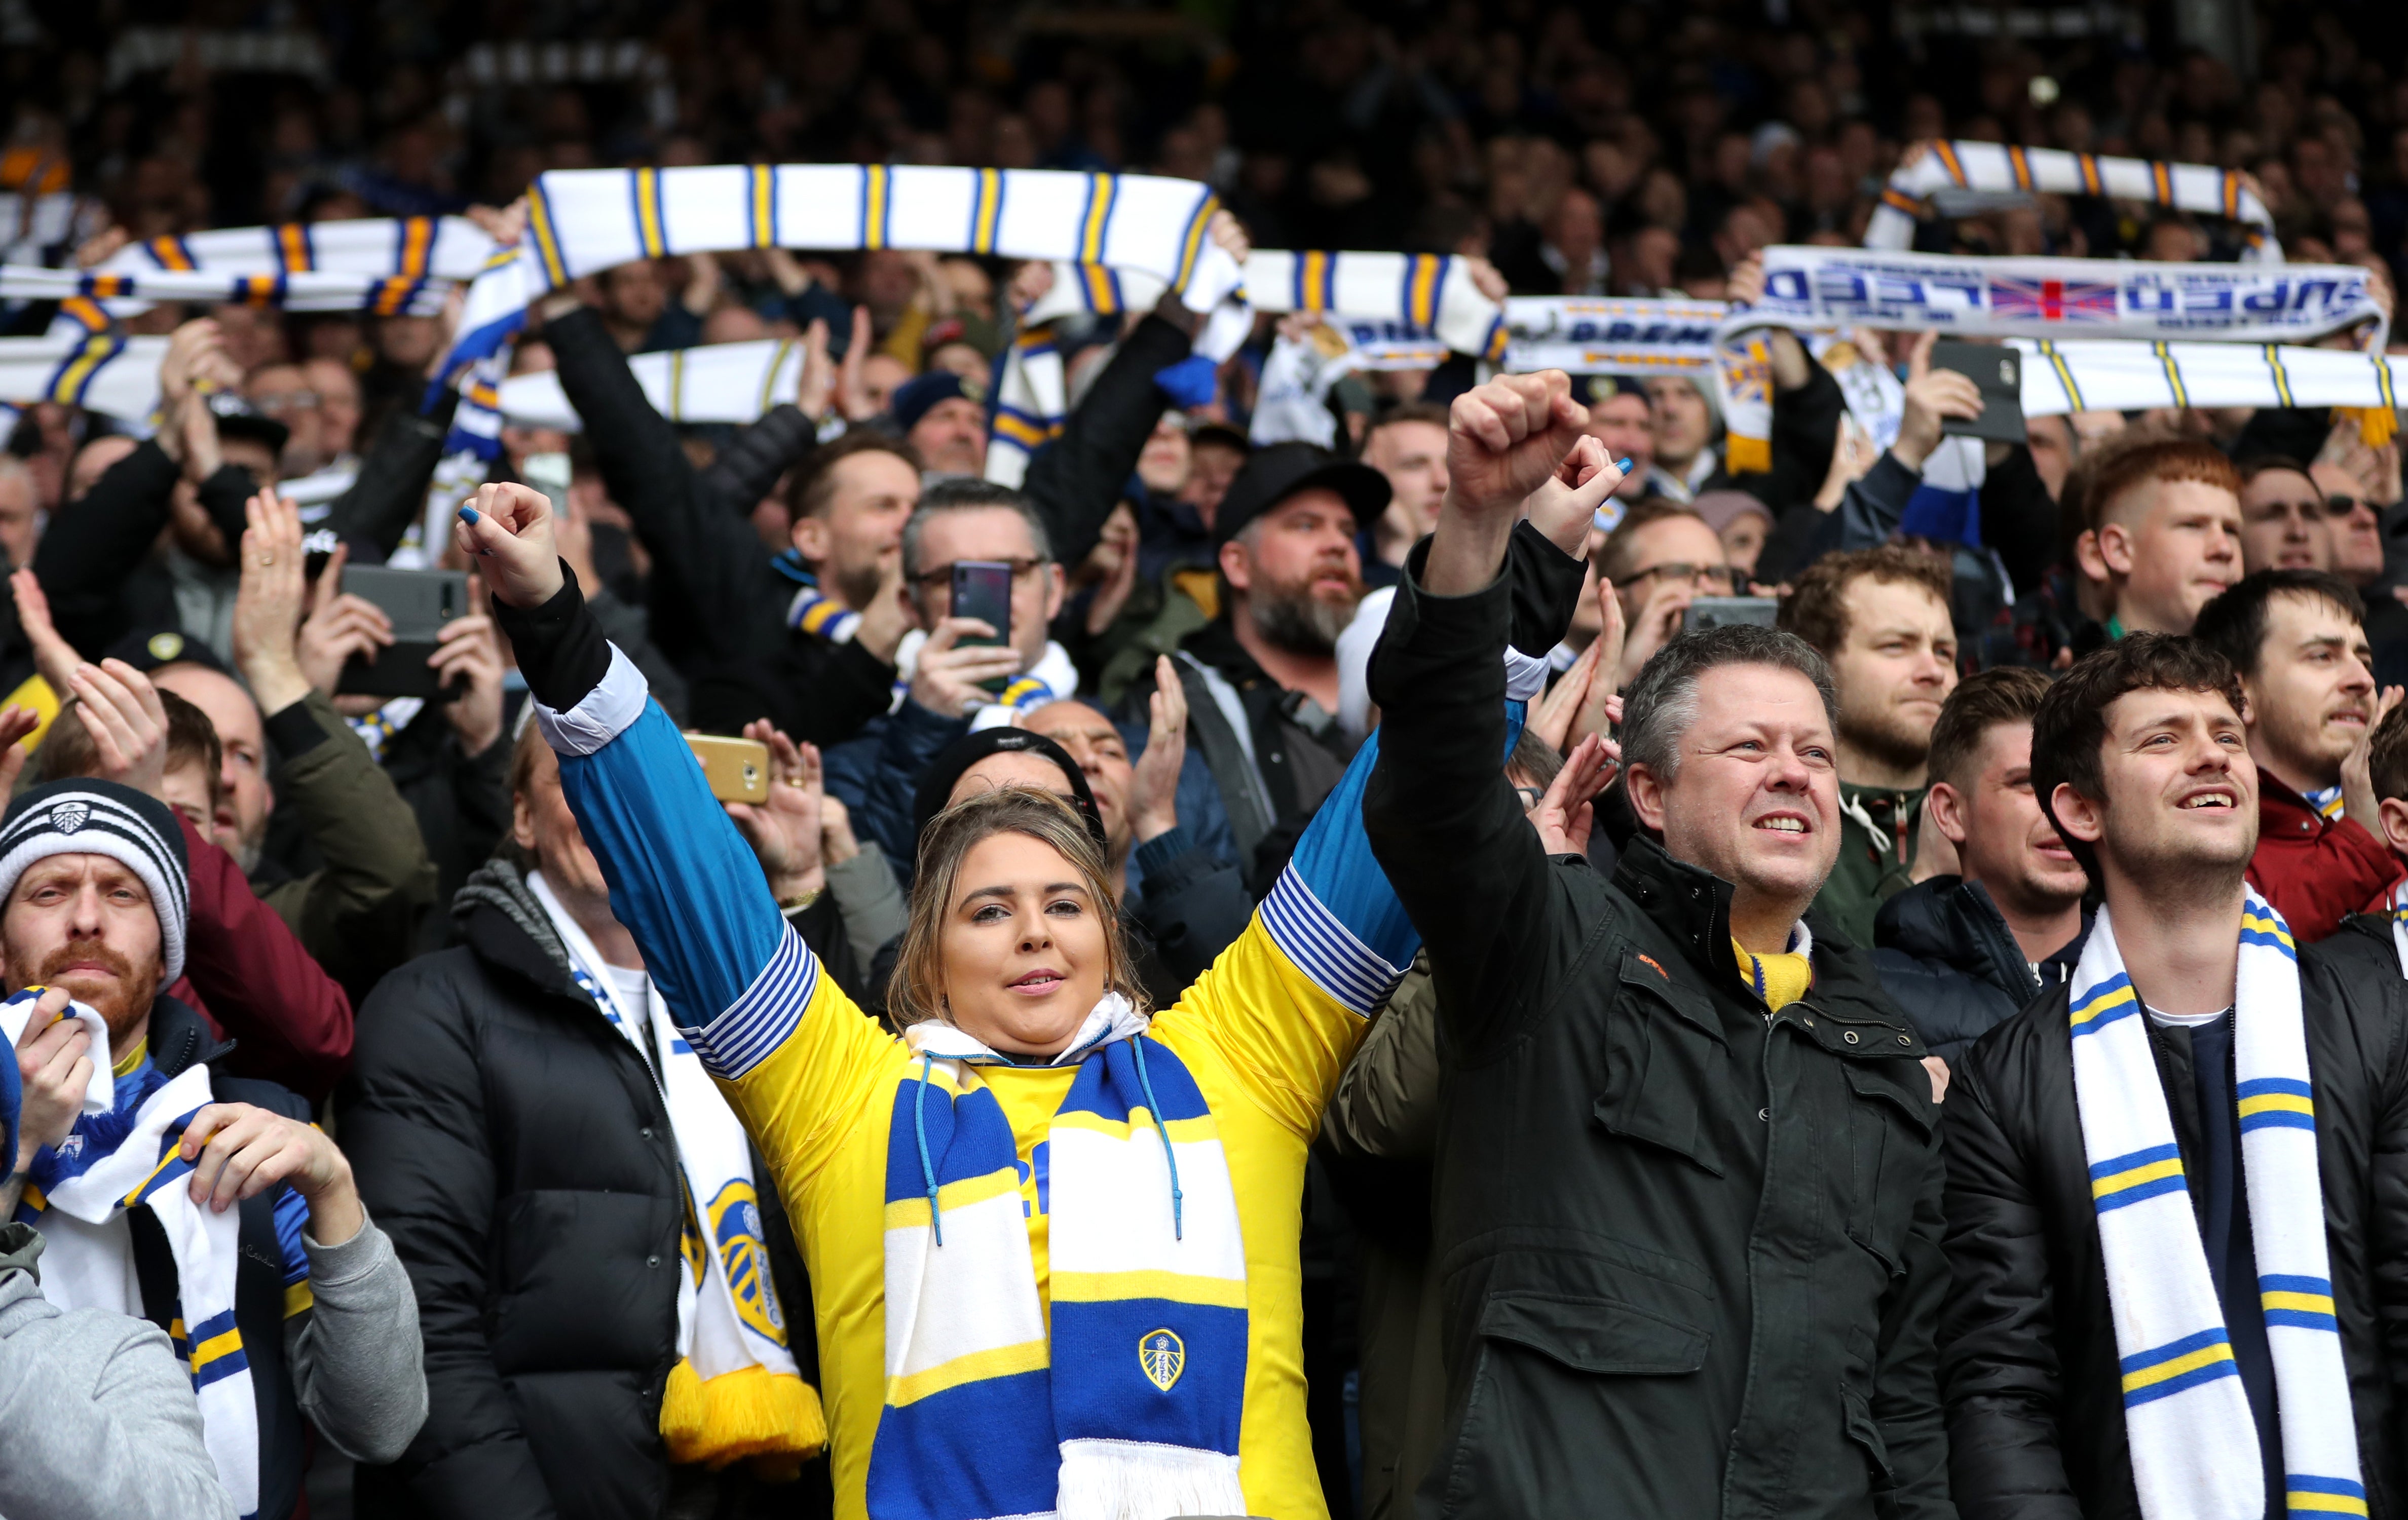 A generation of Leeds fans have yet to attend a Premier League game at Elland Road